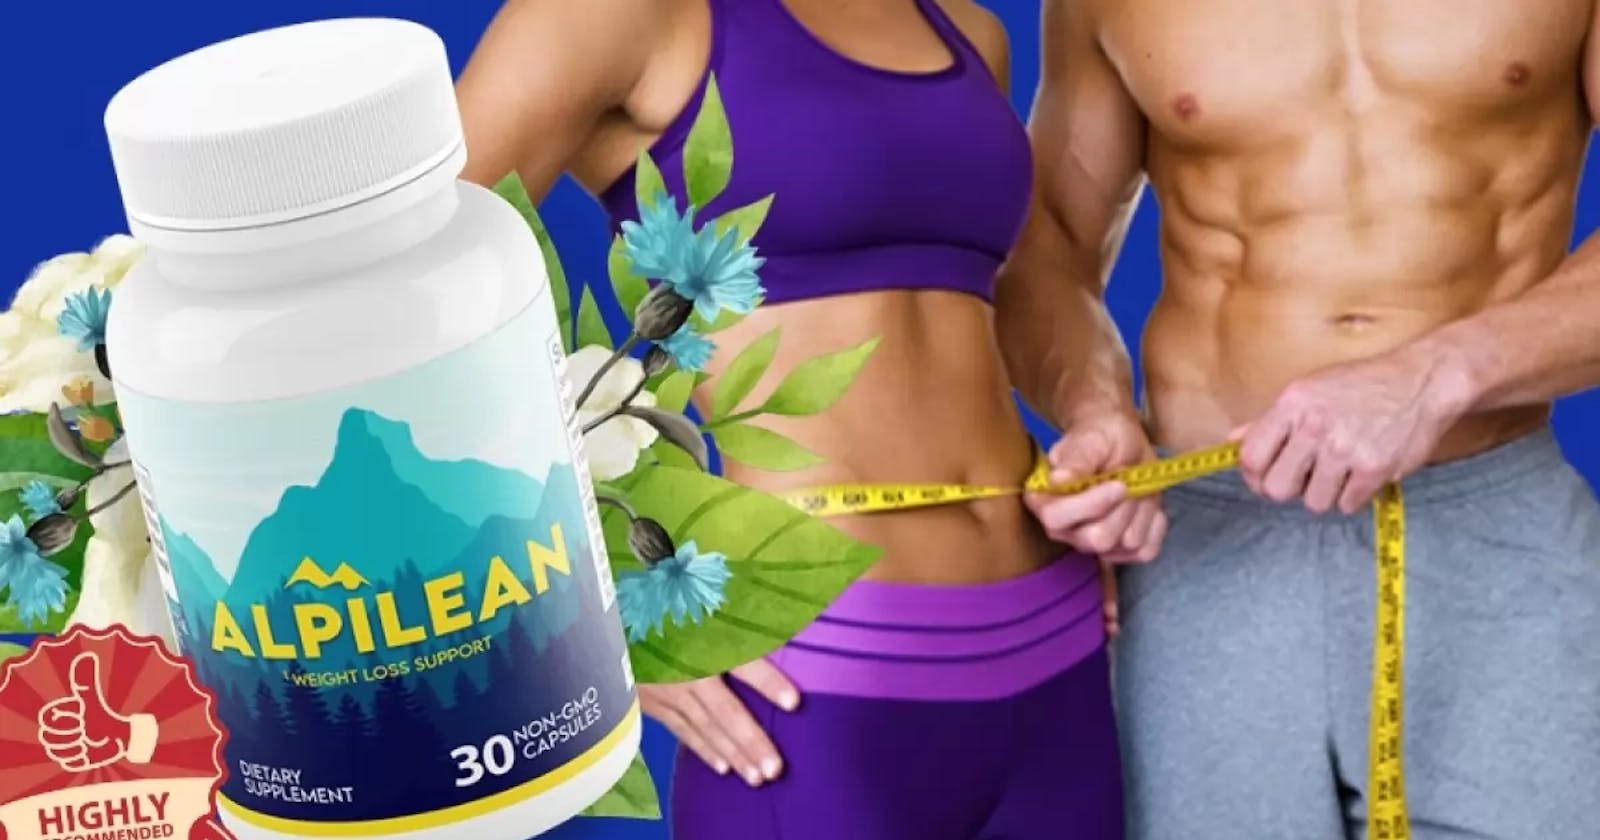 Alpilean Weight Loss Formula Review - How To Lose Weight With Alpilean - Alpilean Review [2023 Report]